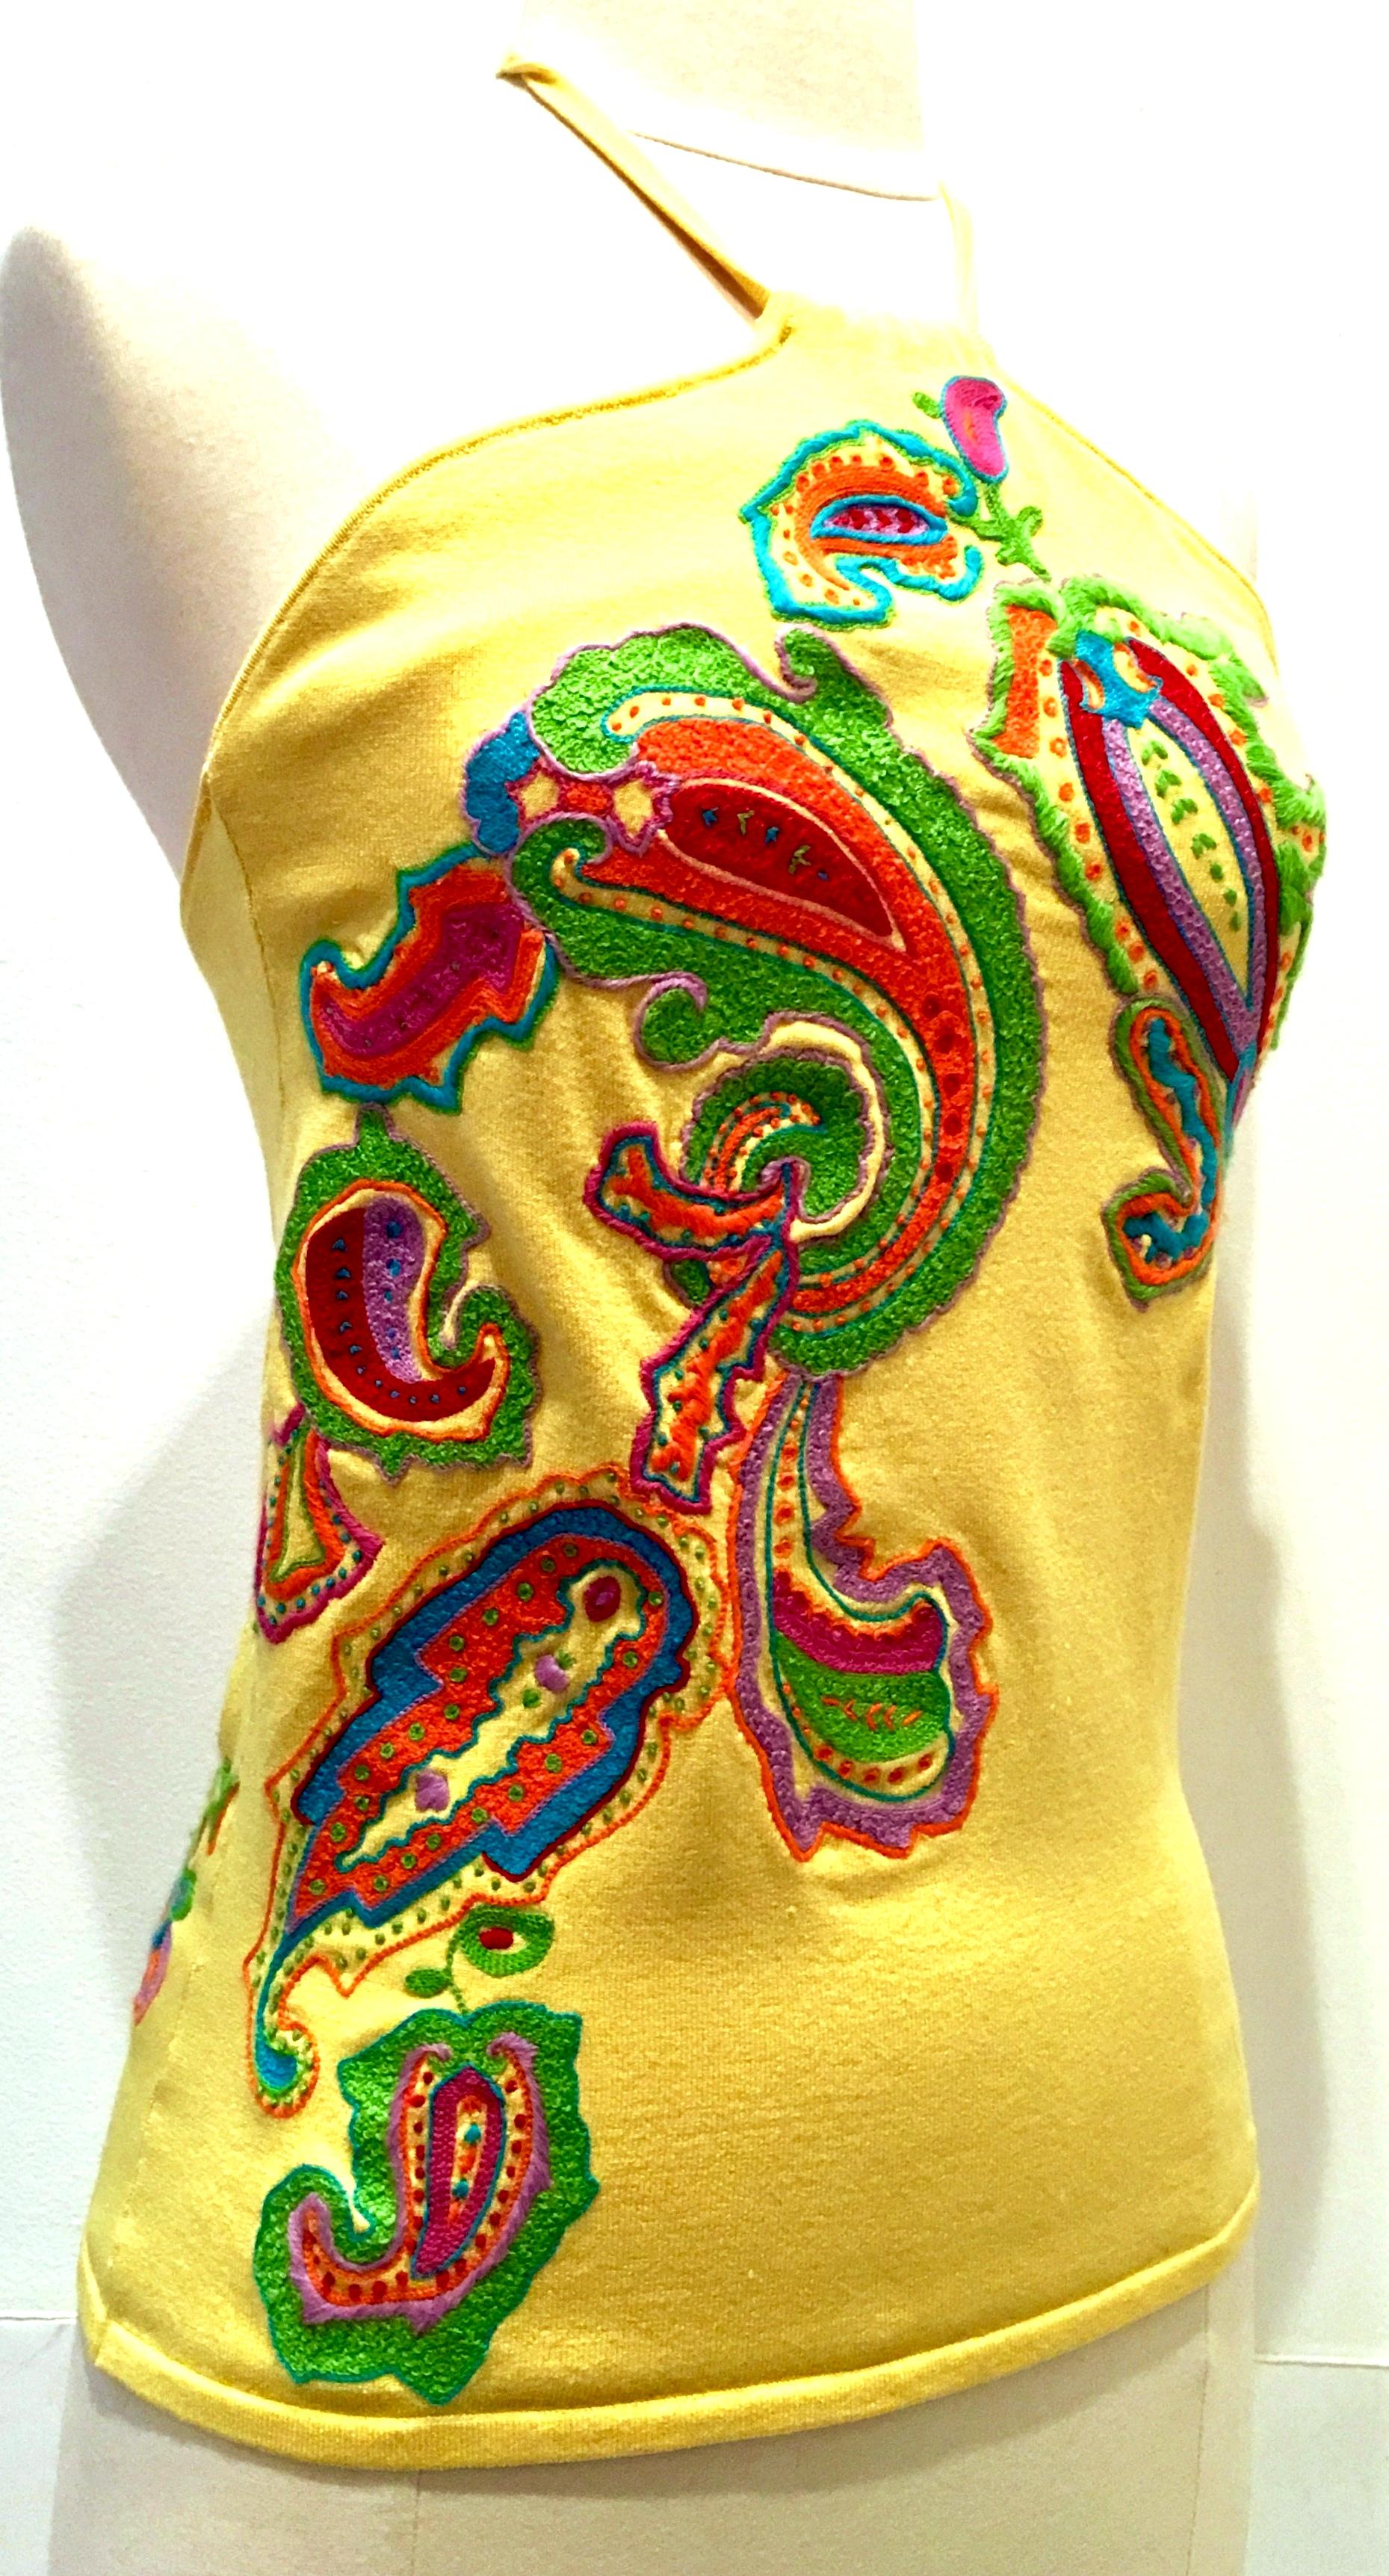 21 Century Silk Blend Bright Yellow Paisley Embroidery Halter Top By, Ralph Lauren. This like new silk blend top features a vivid multi colored embroidery applique pattern both front and back and built in shelf bra. Maintains the original